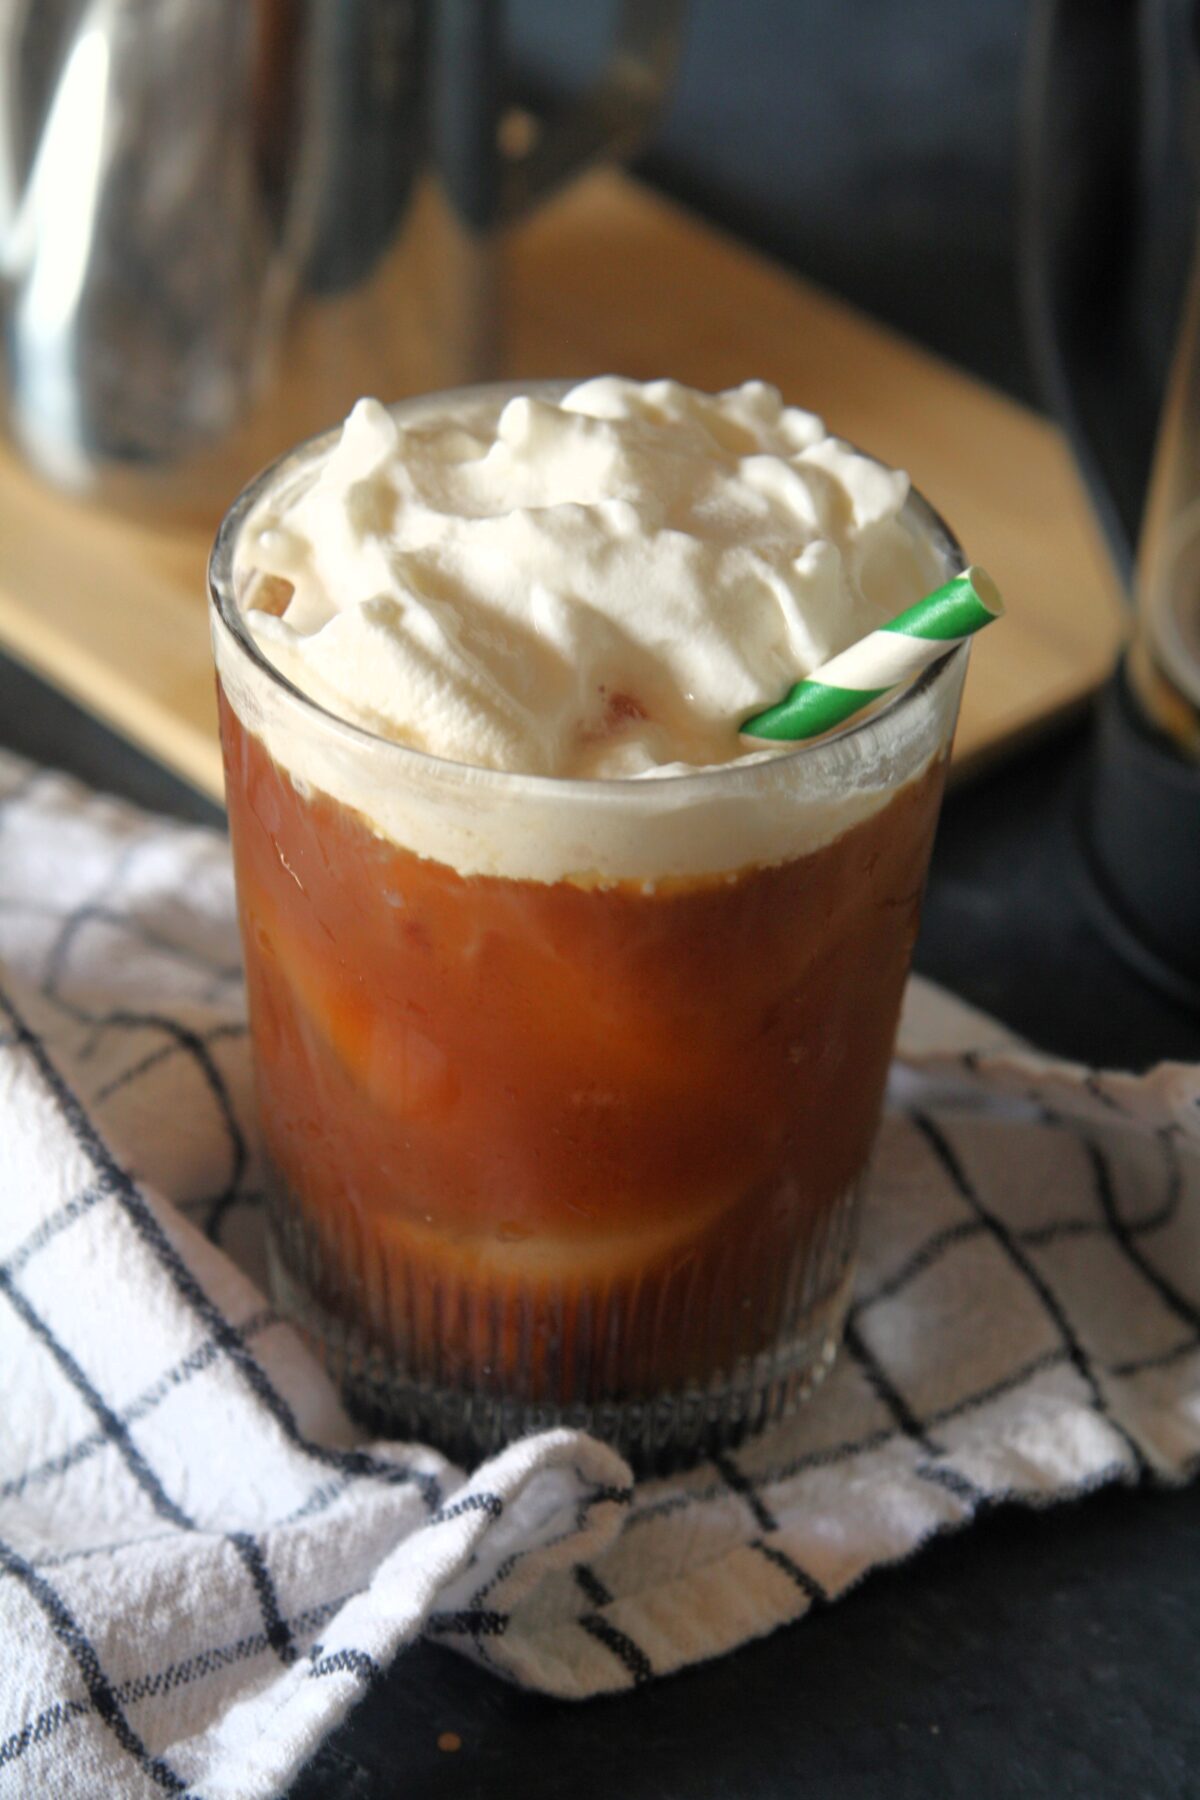 Upgrade your iced coffee with a swirl of Irish cream syrup, topped with sweet cream cold foam and a hint of cocoa powder. You can make this seasonal Starbucks copycat recipe at home and enjoy it all year round.